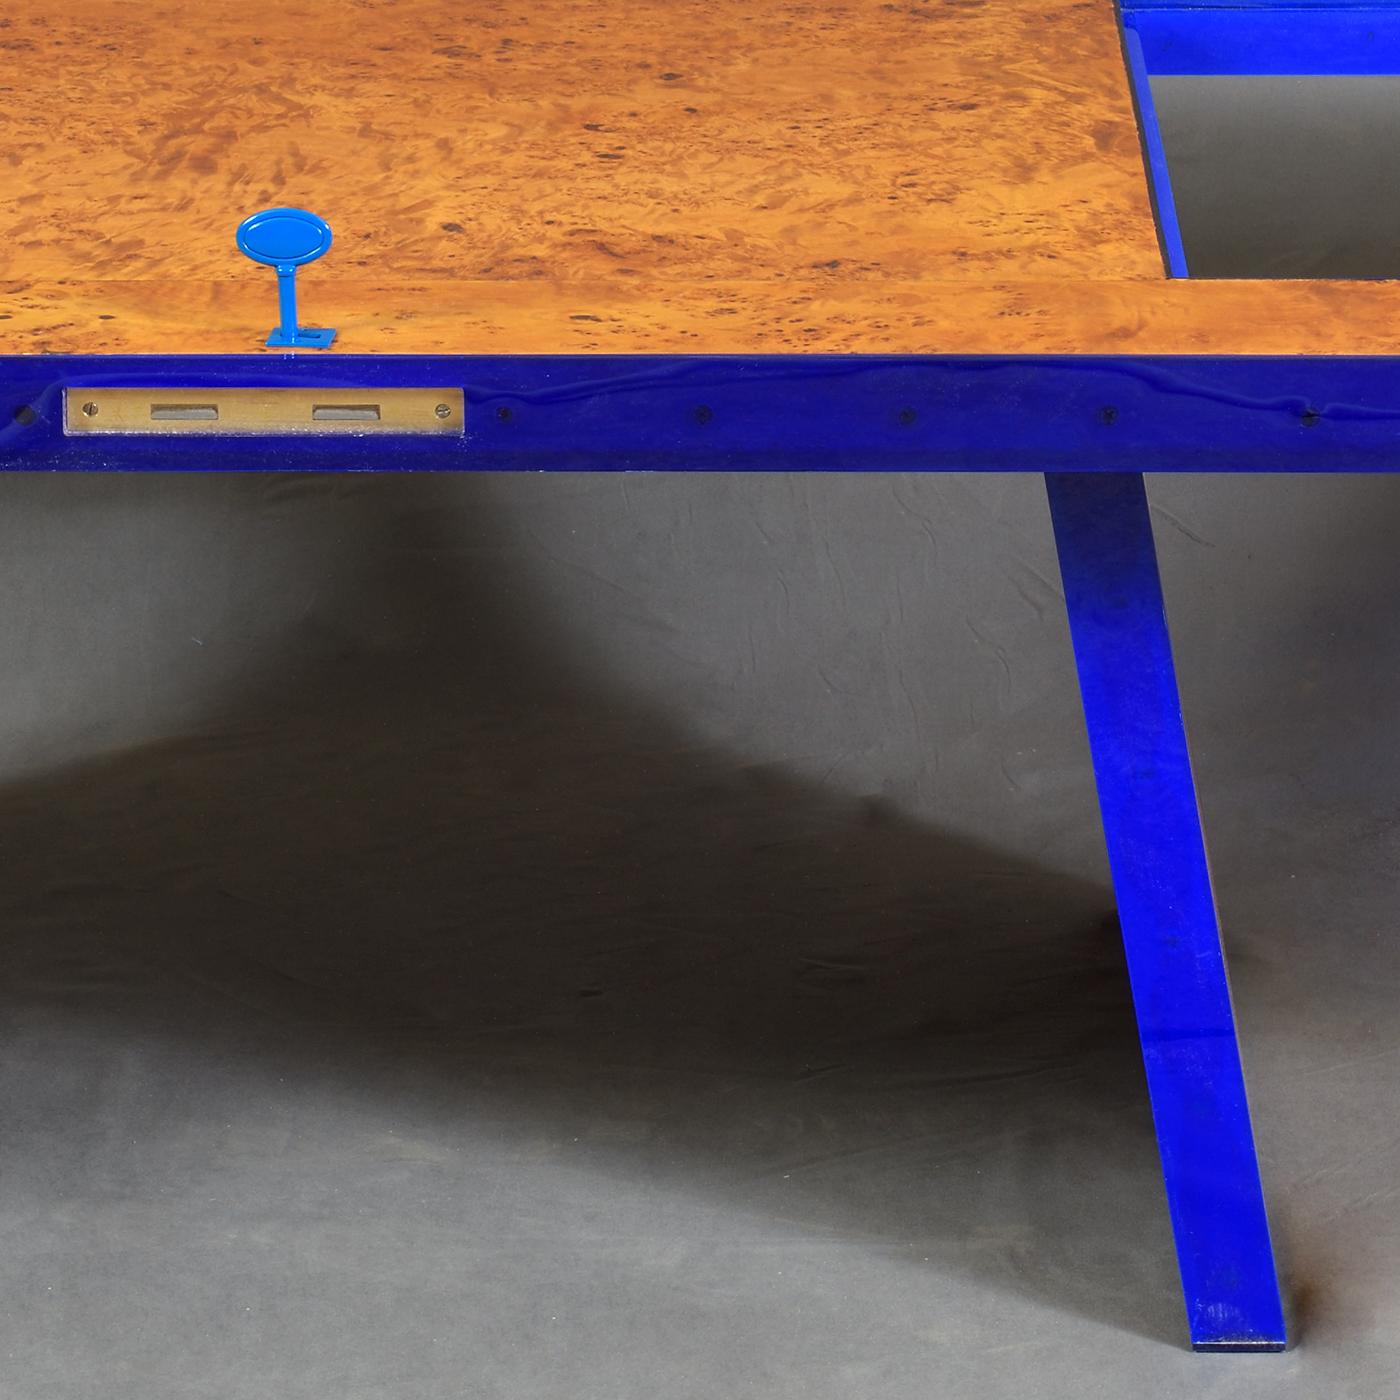 The playful approach of artist Michele Iodice is actualized in this one-of-a-kind coffee table, whose top is a wooden door with cut-out elements transforming into slightly slanted legs. Enlivened by vibrant accents in electric-blue plexiglas, this